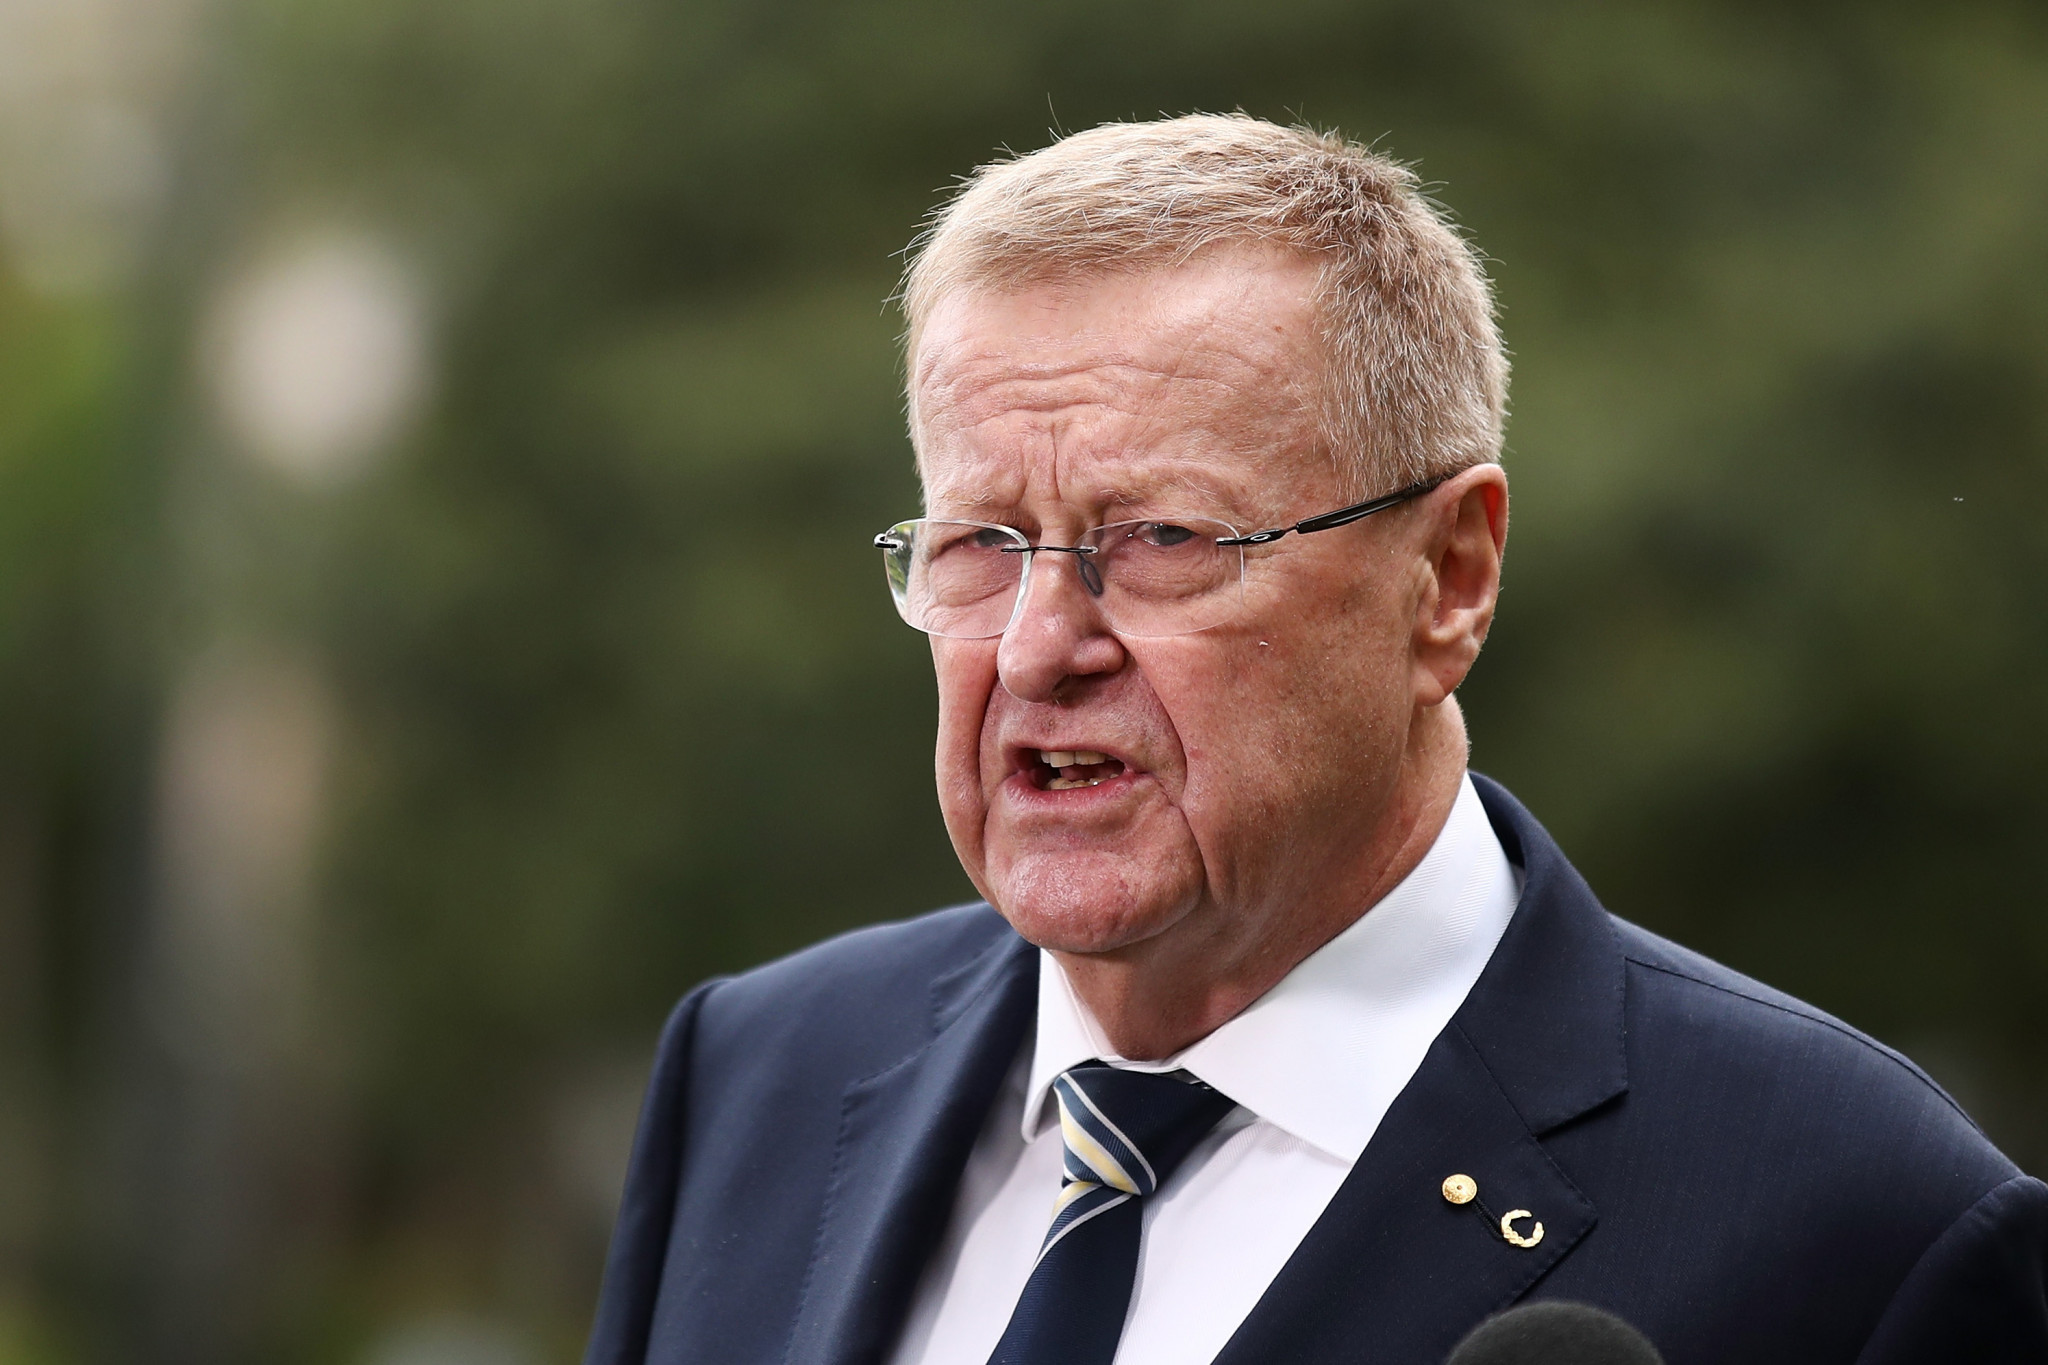 IOC vice-president and Tokyo 2020 Coordination Commission chair John Coates has appeared confident the Olympic and Paralympic Games will take place in the Japanese capital next year ©Getty Images